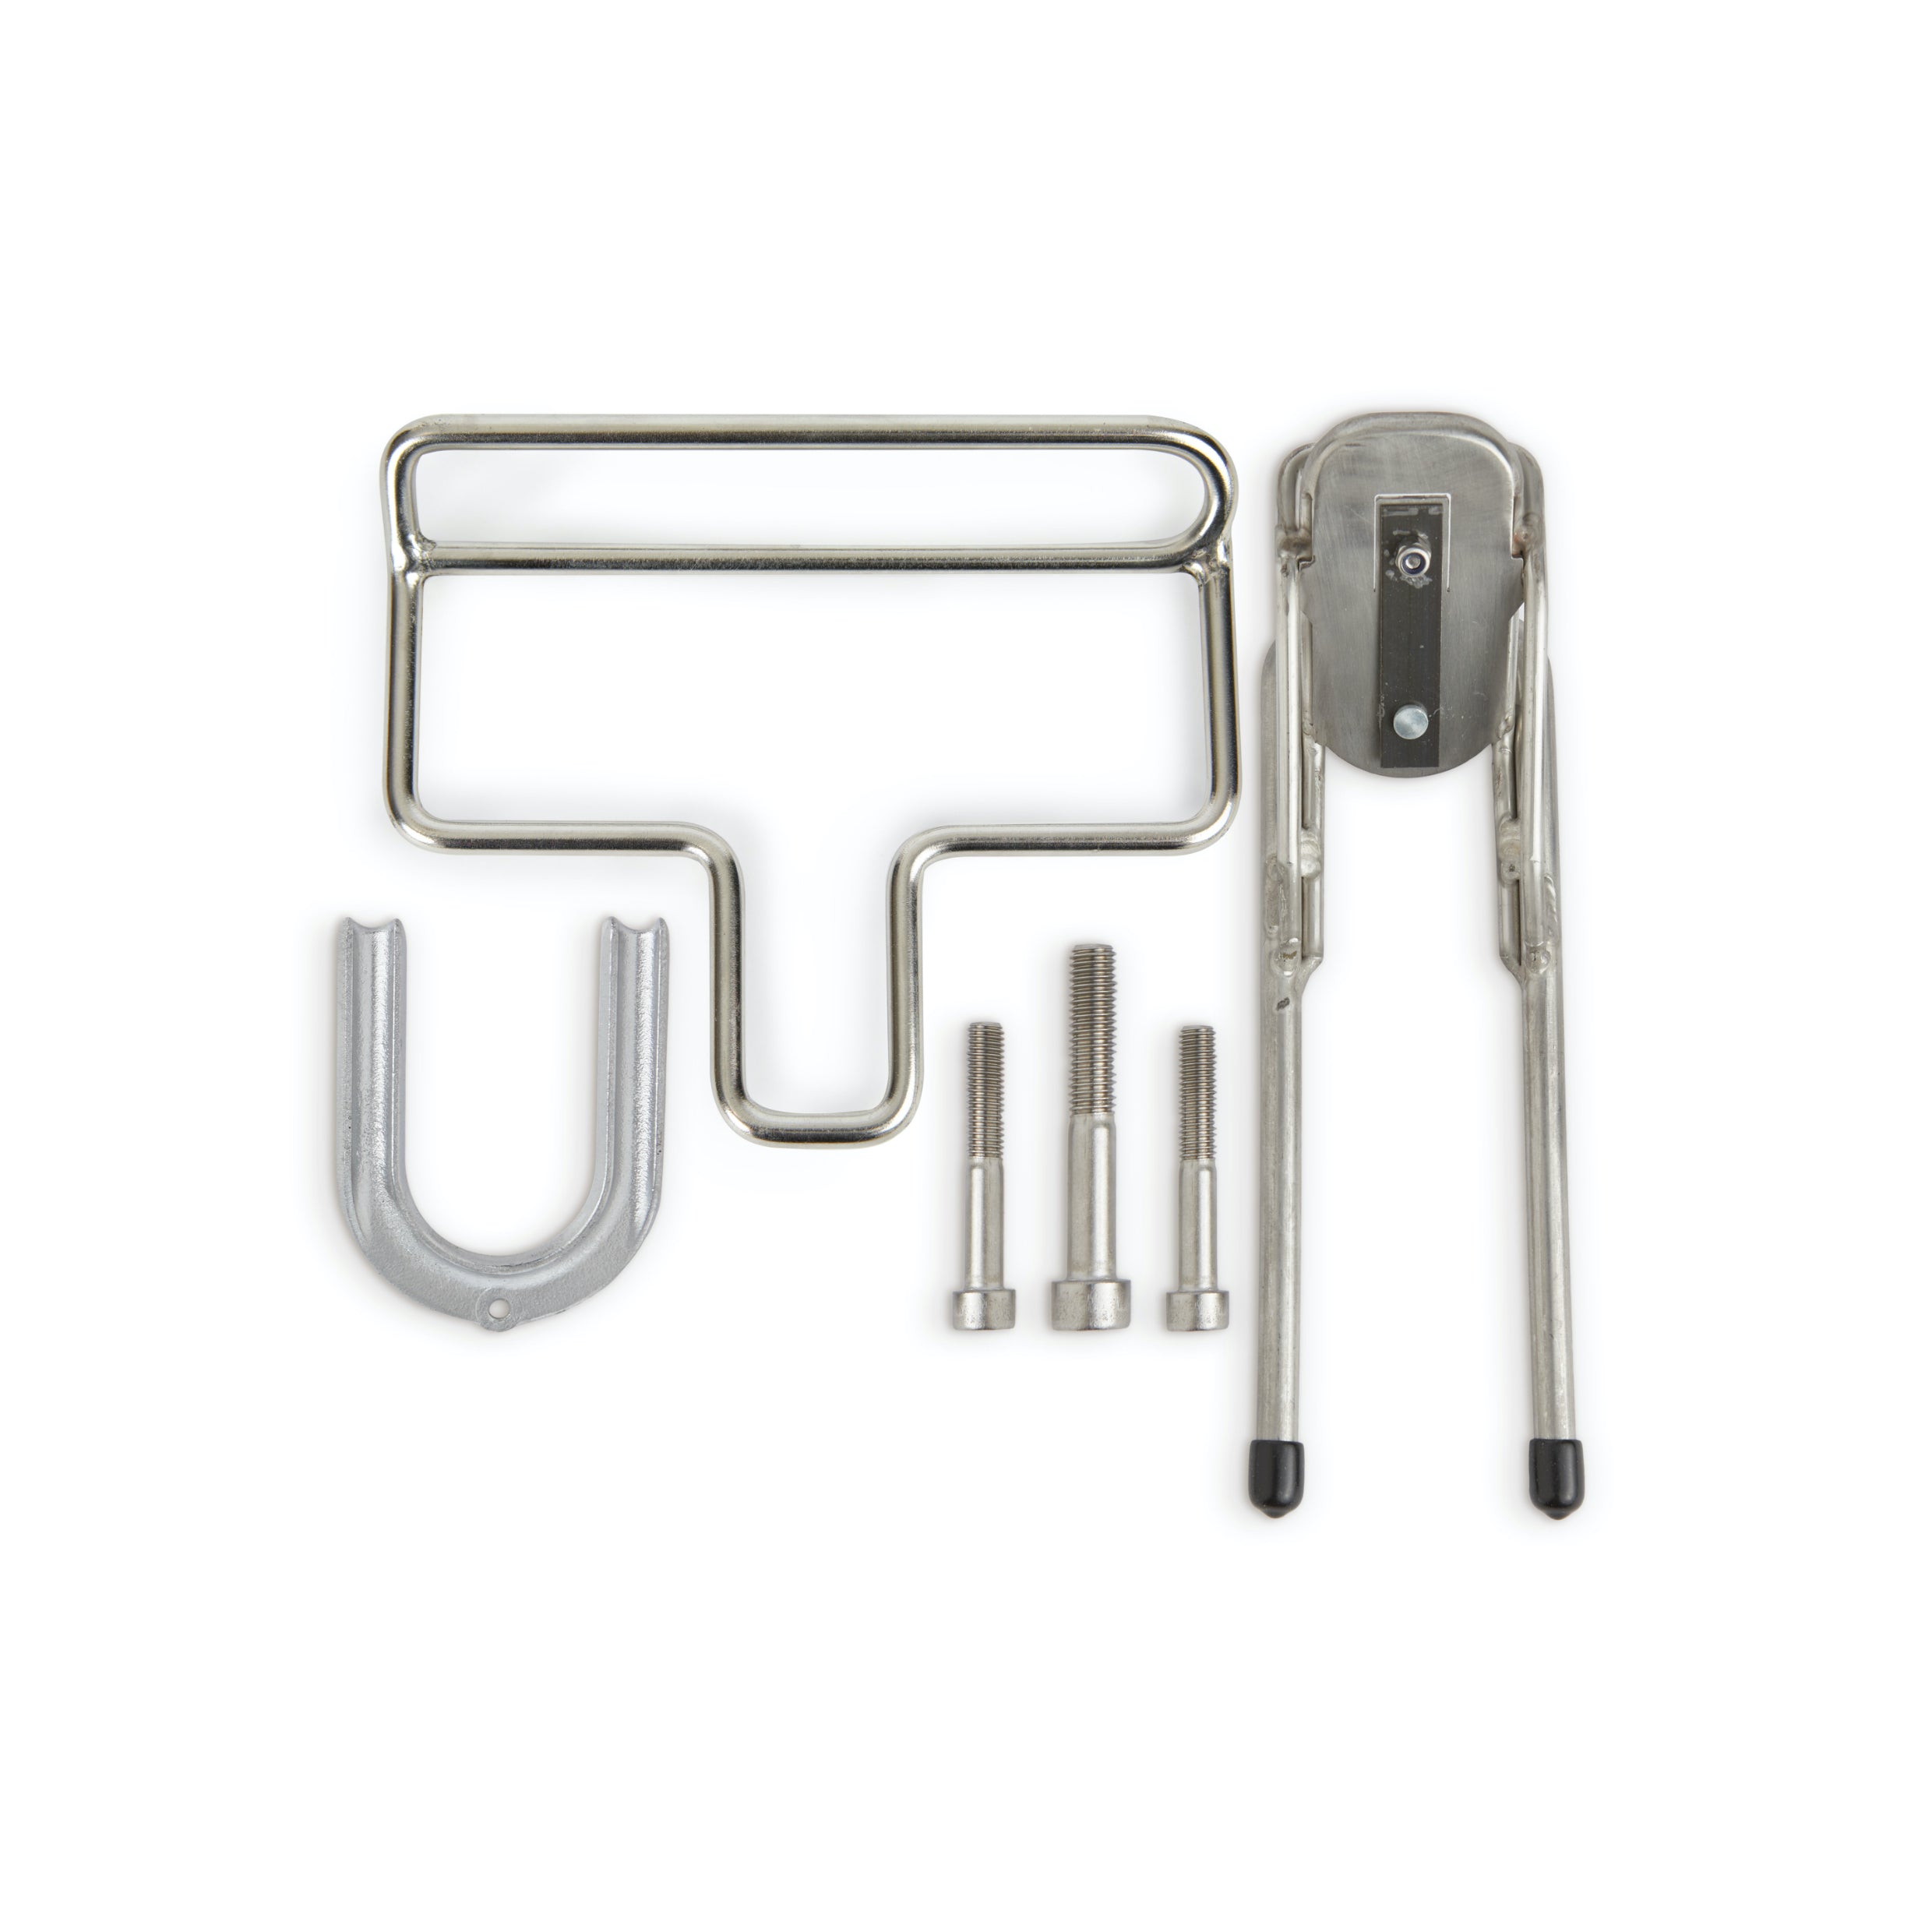 Frost and Sekers Quick Release Micro Rack Kit for Bikes with Standard Seatposts